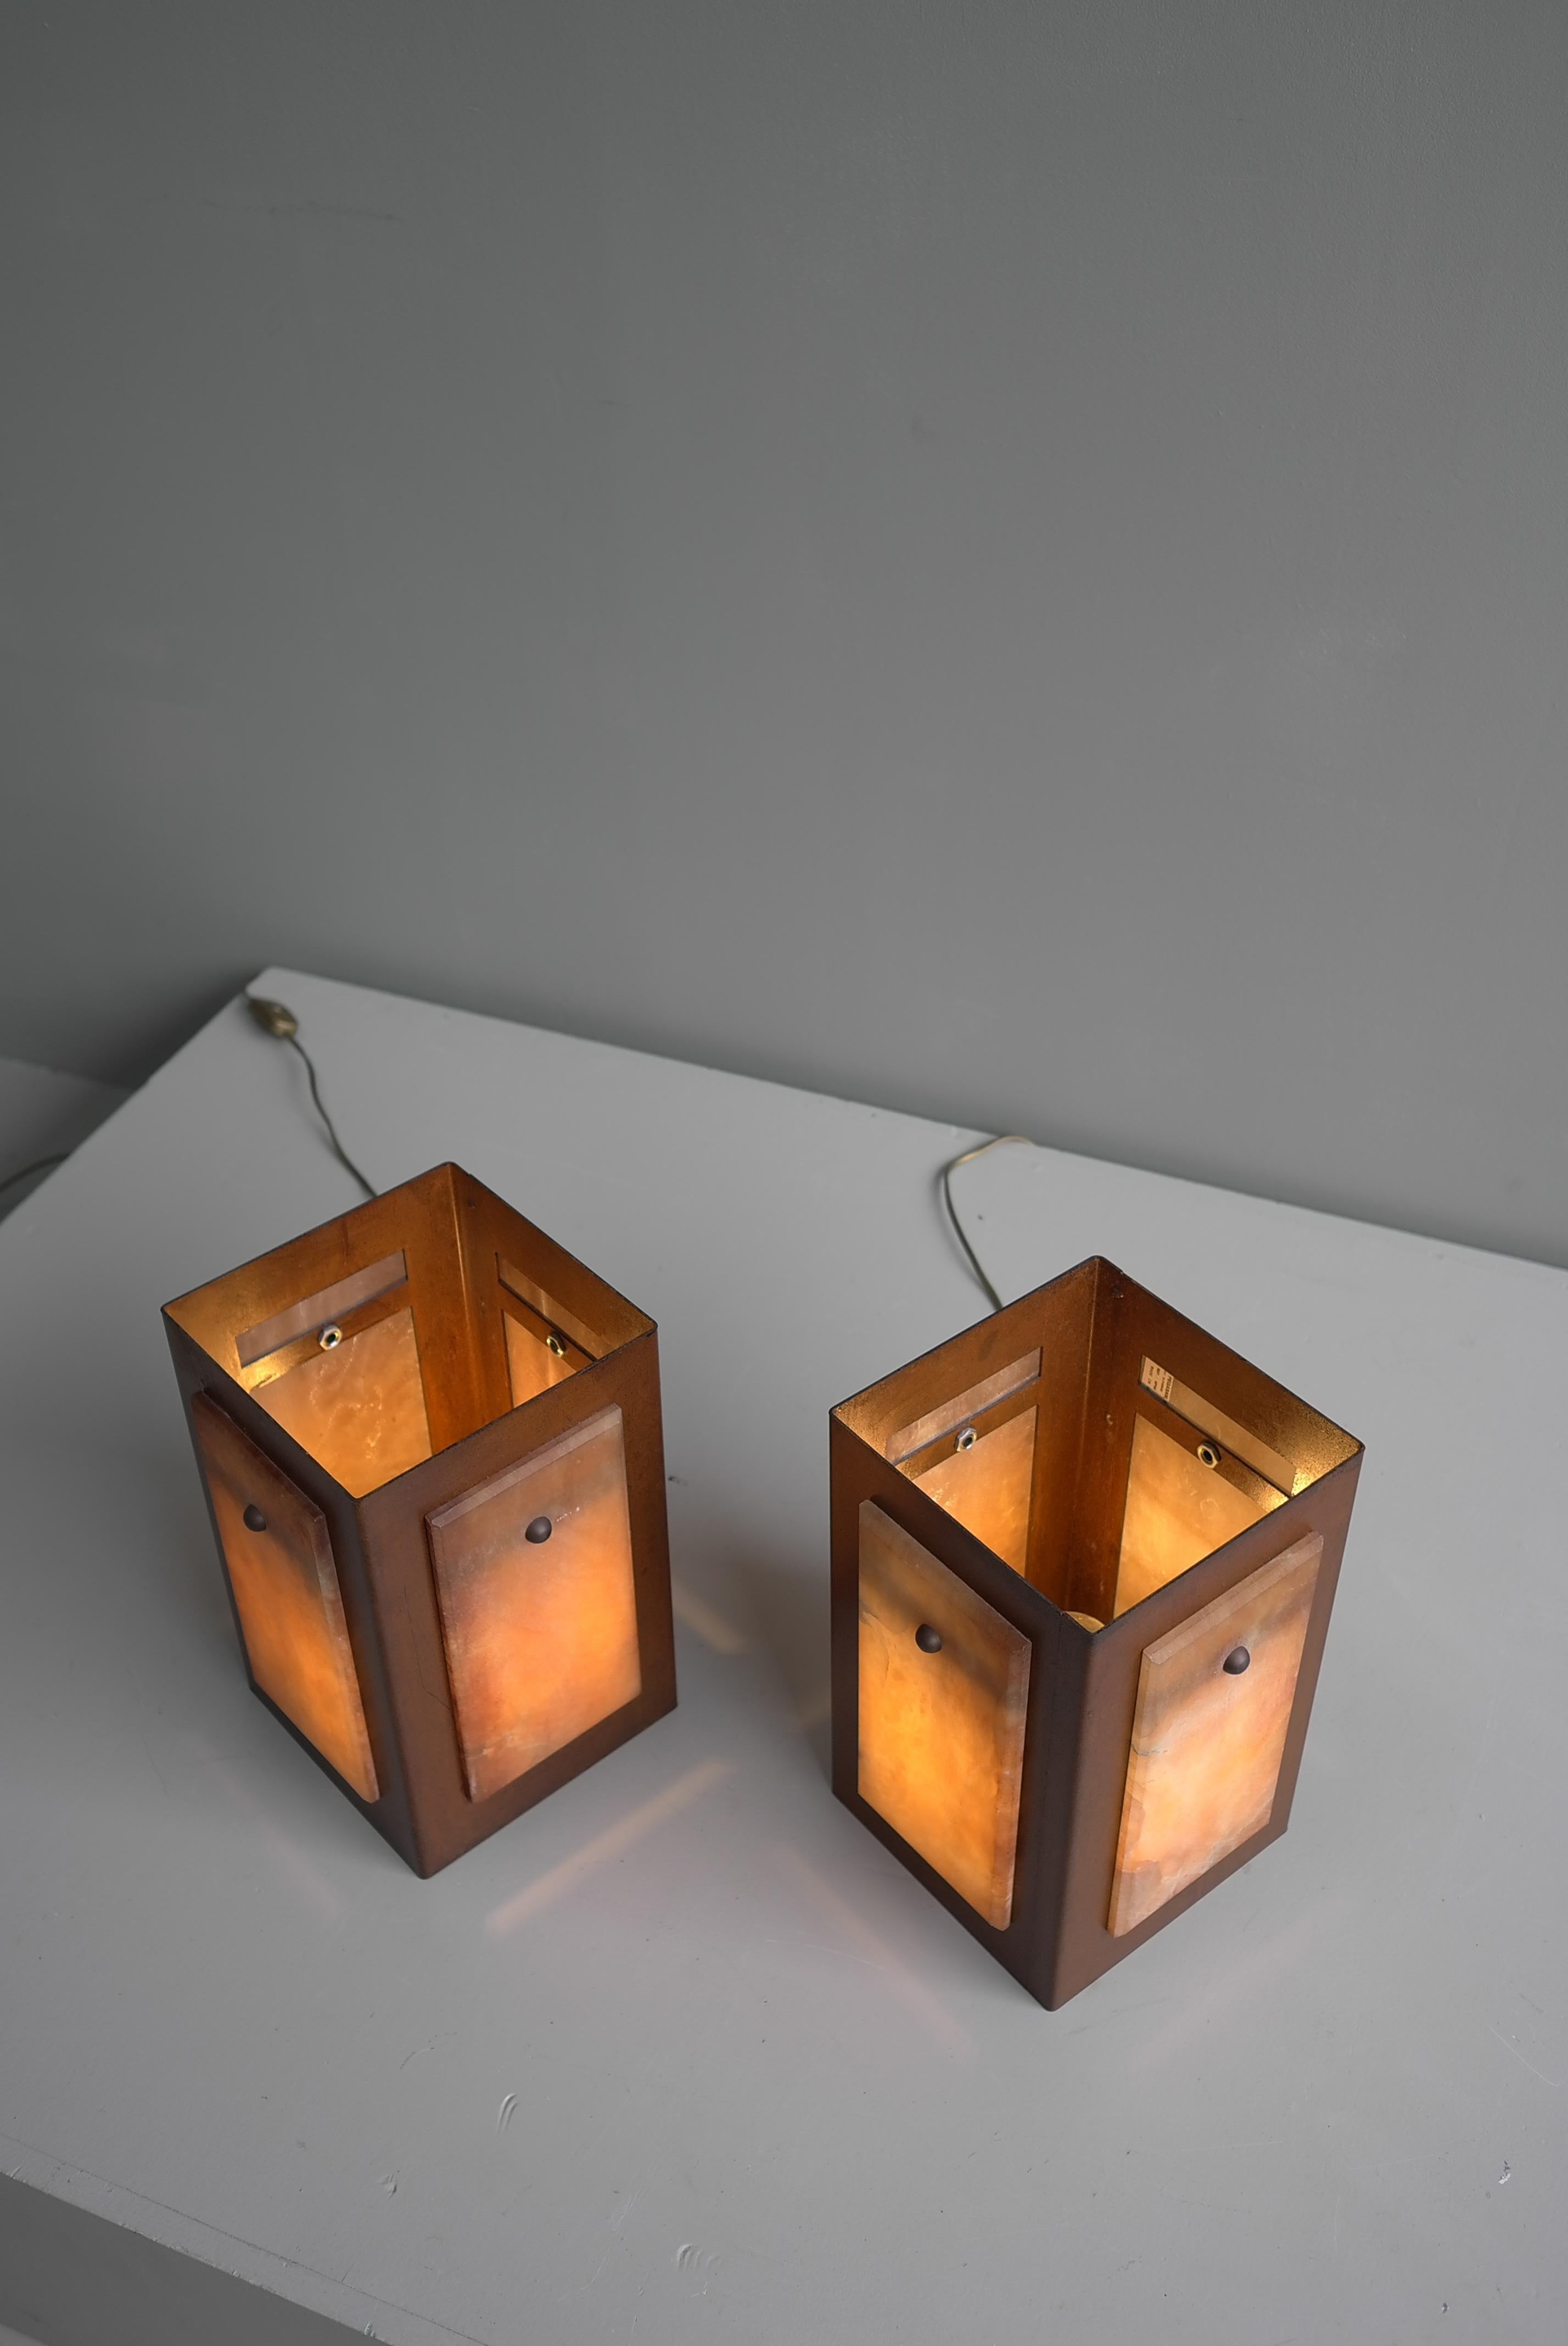 Spanish Table Lamps in Alabaster Stone and Rusty Metal, by Pegasam, Spain 1970s For Sale